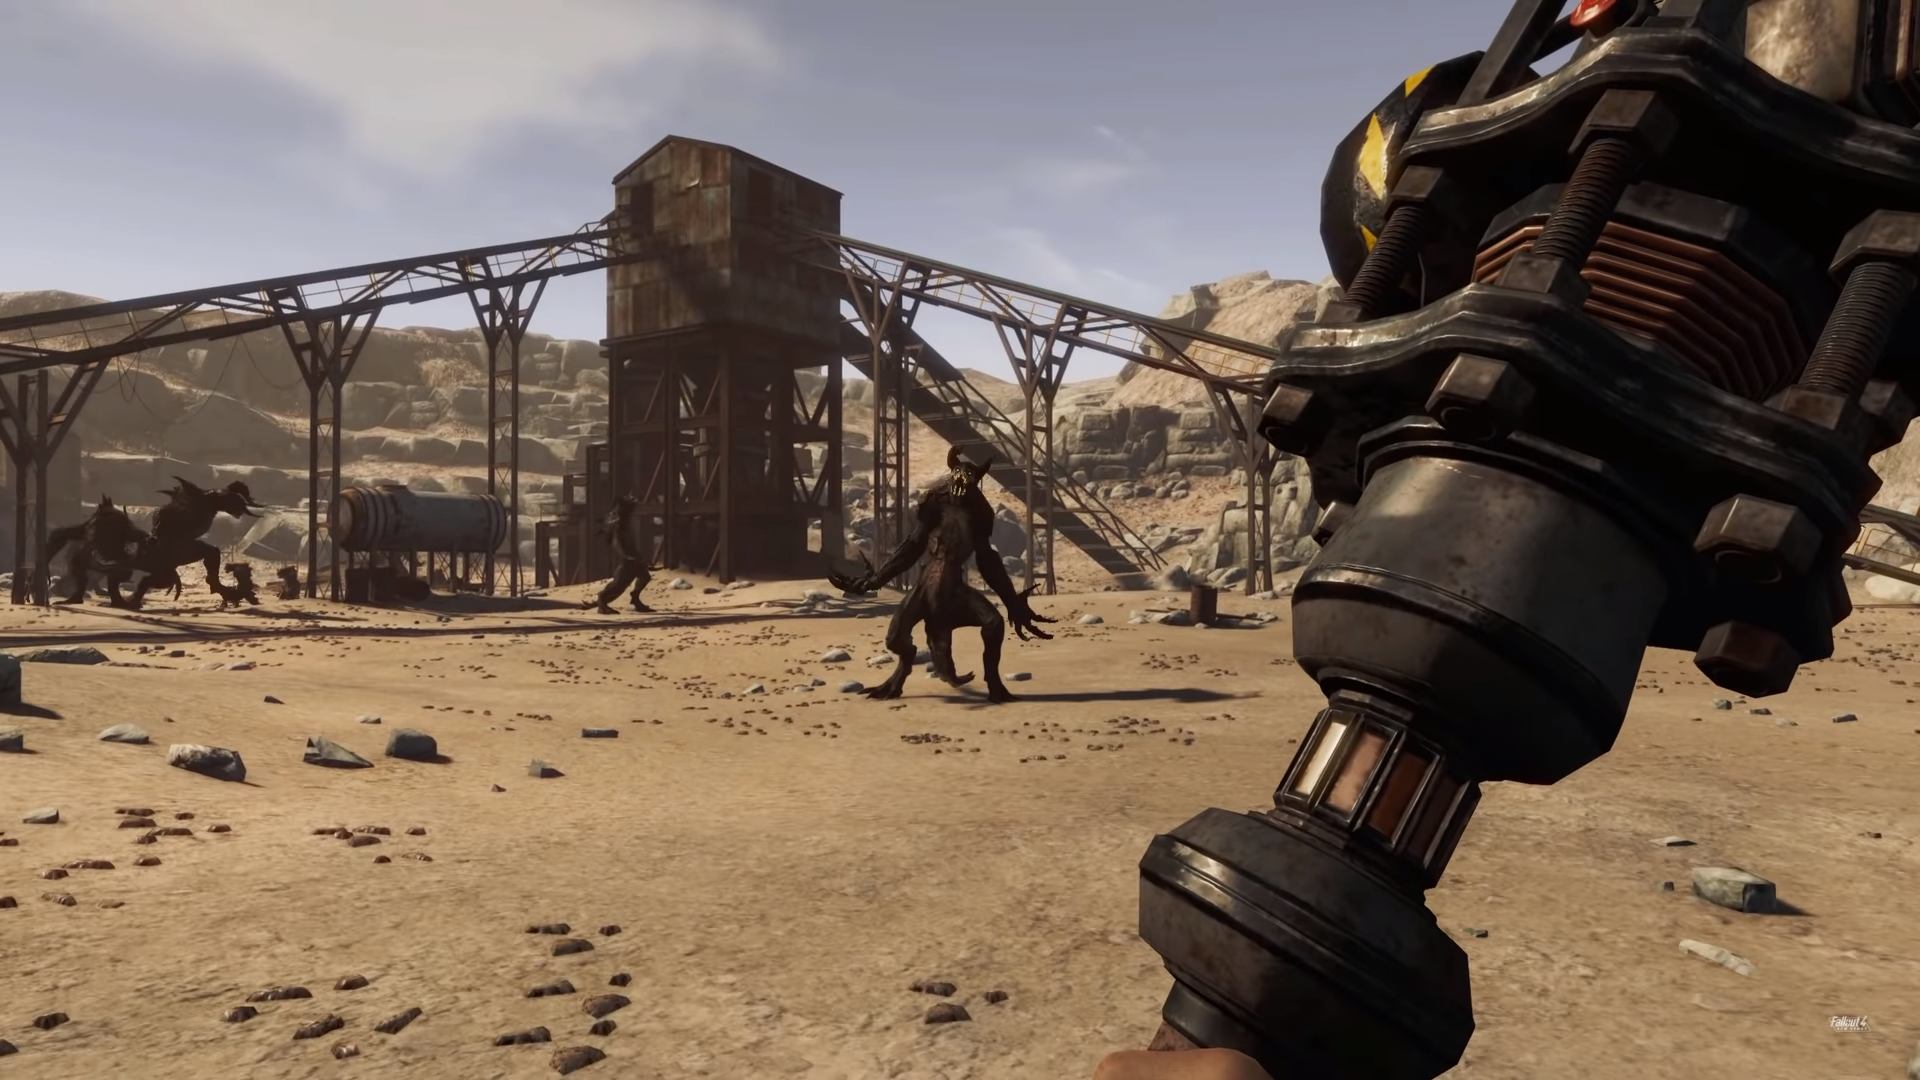 Check out the start of New Vegas recreated in Fallout 4 by modders